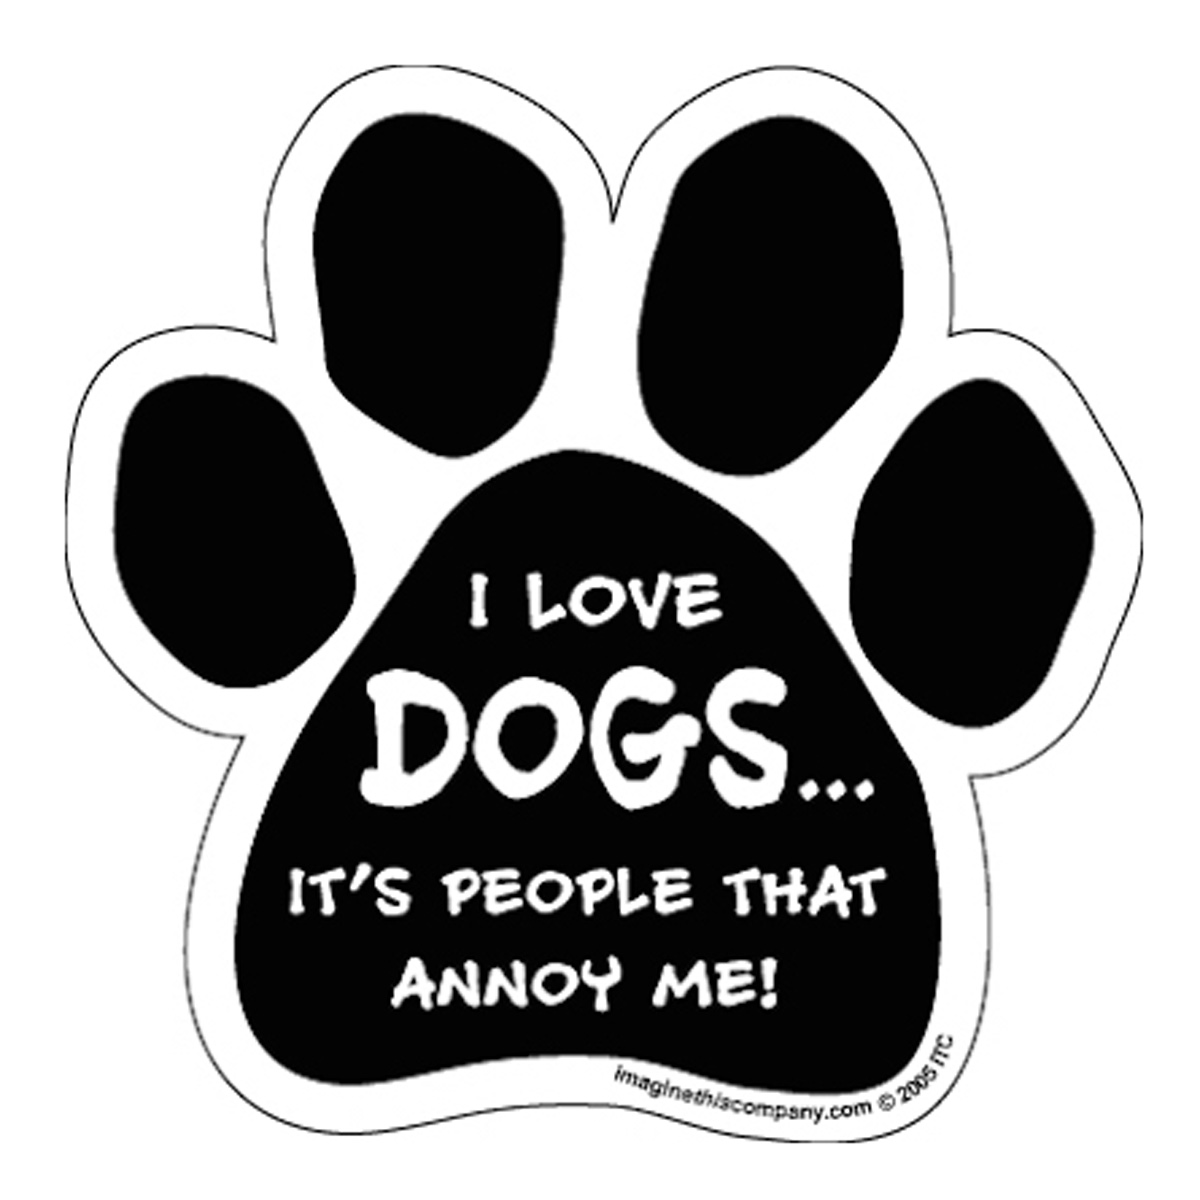 I Love Dogs...It's People That Annoy Me! Paw Magnet